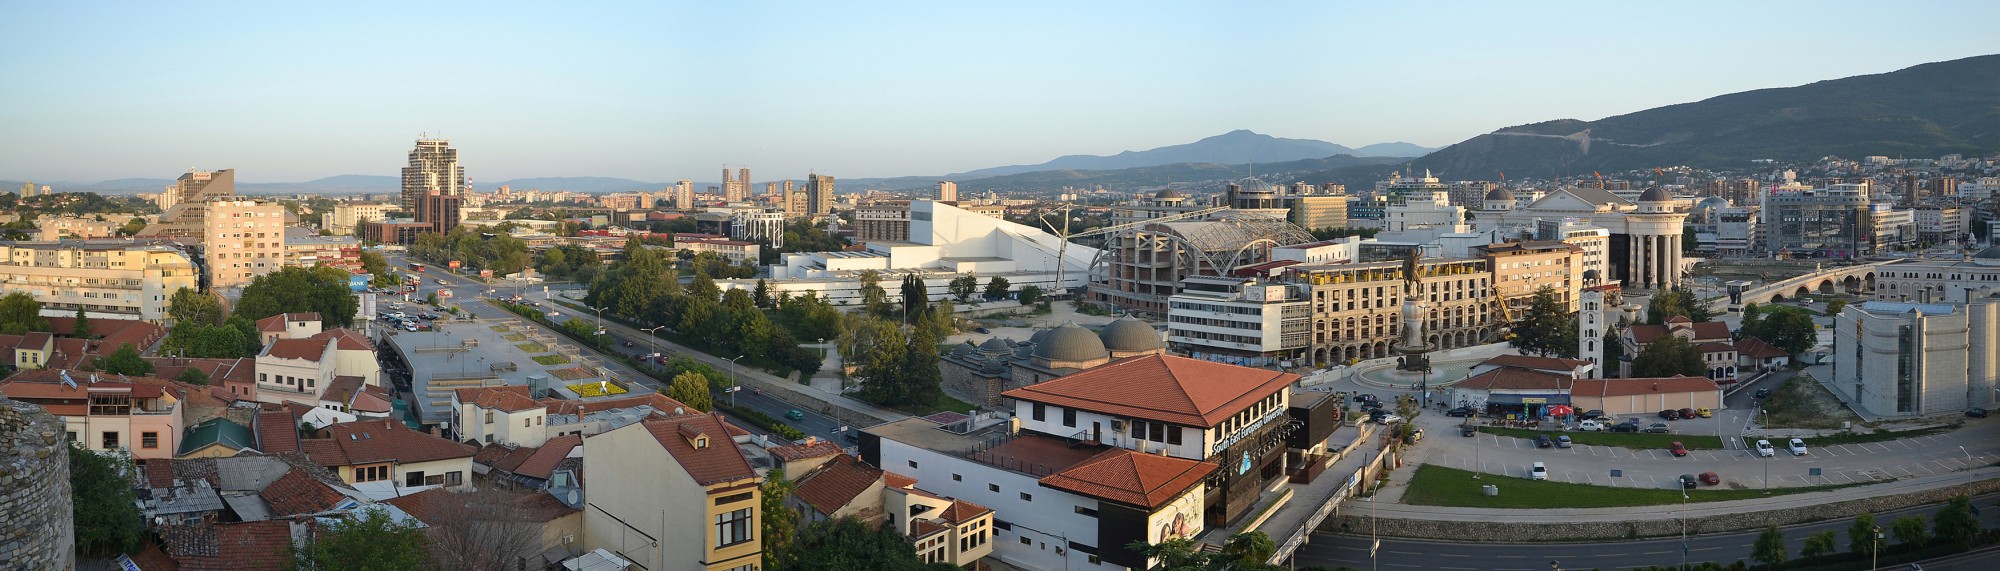 Skopje - panorama from fortress